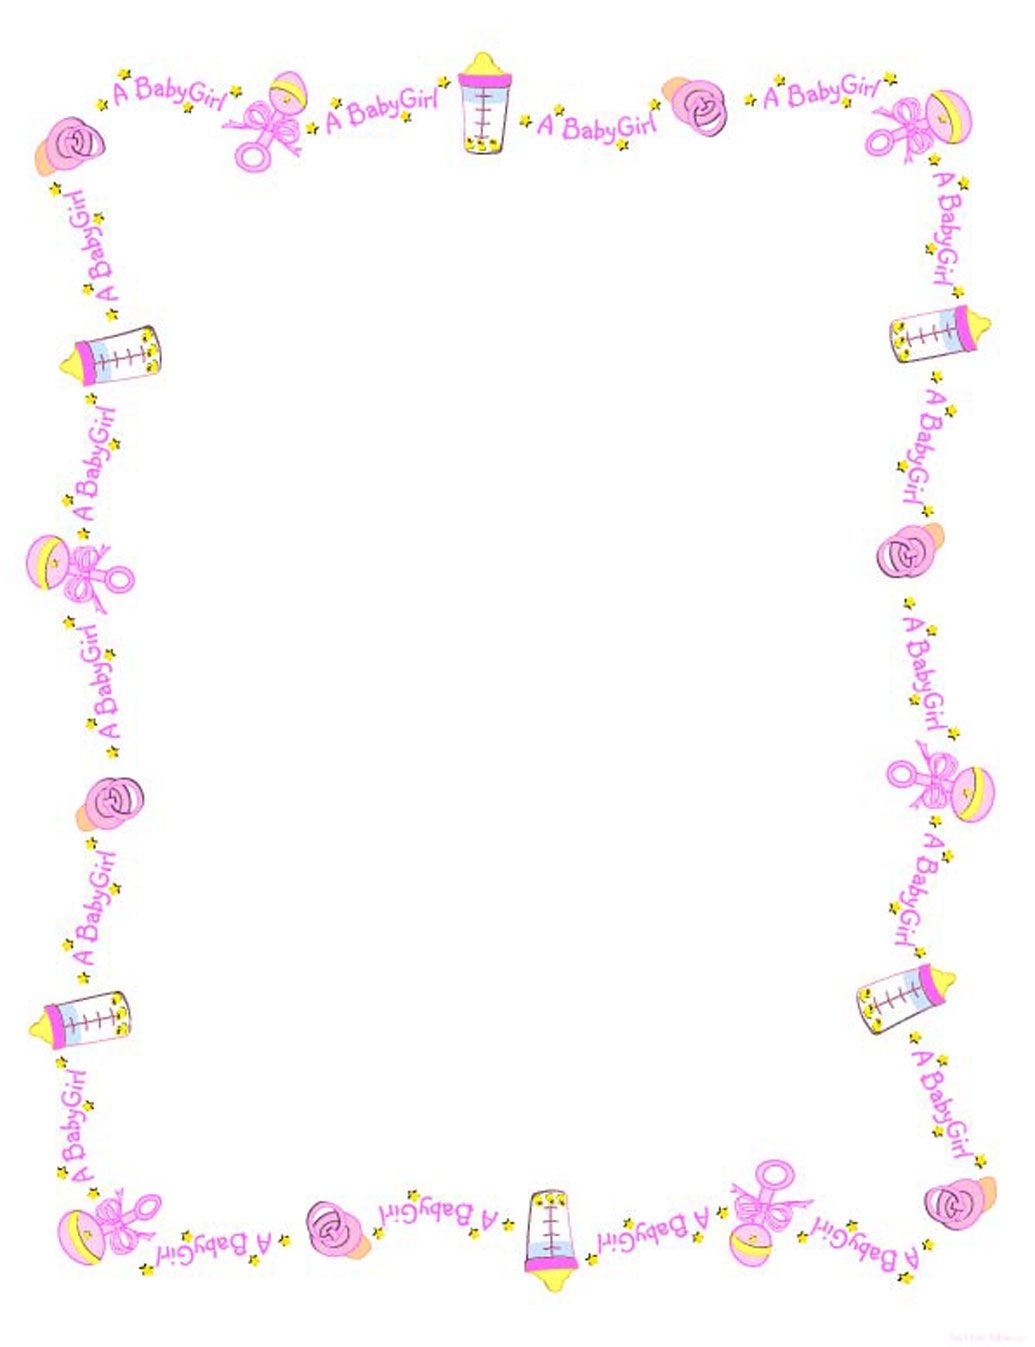 Baby Girl Borders Clipart - Clipart Kid | Projects | Baby Frame - Free Printable Baby Borders For Paper